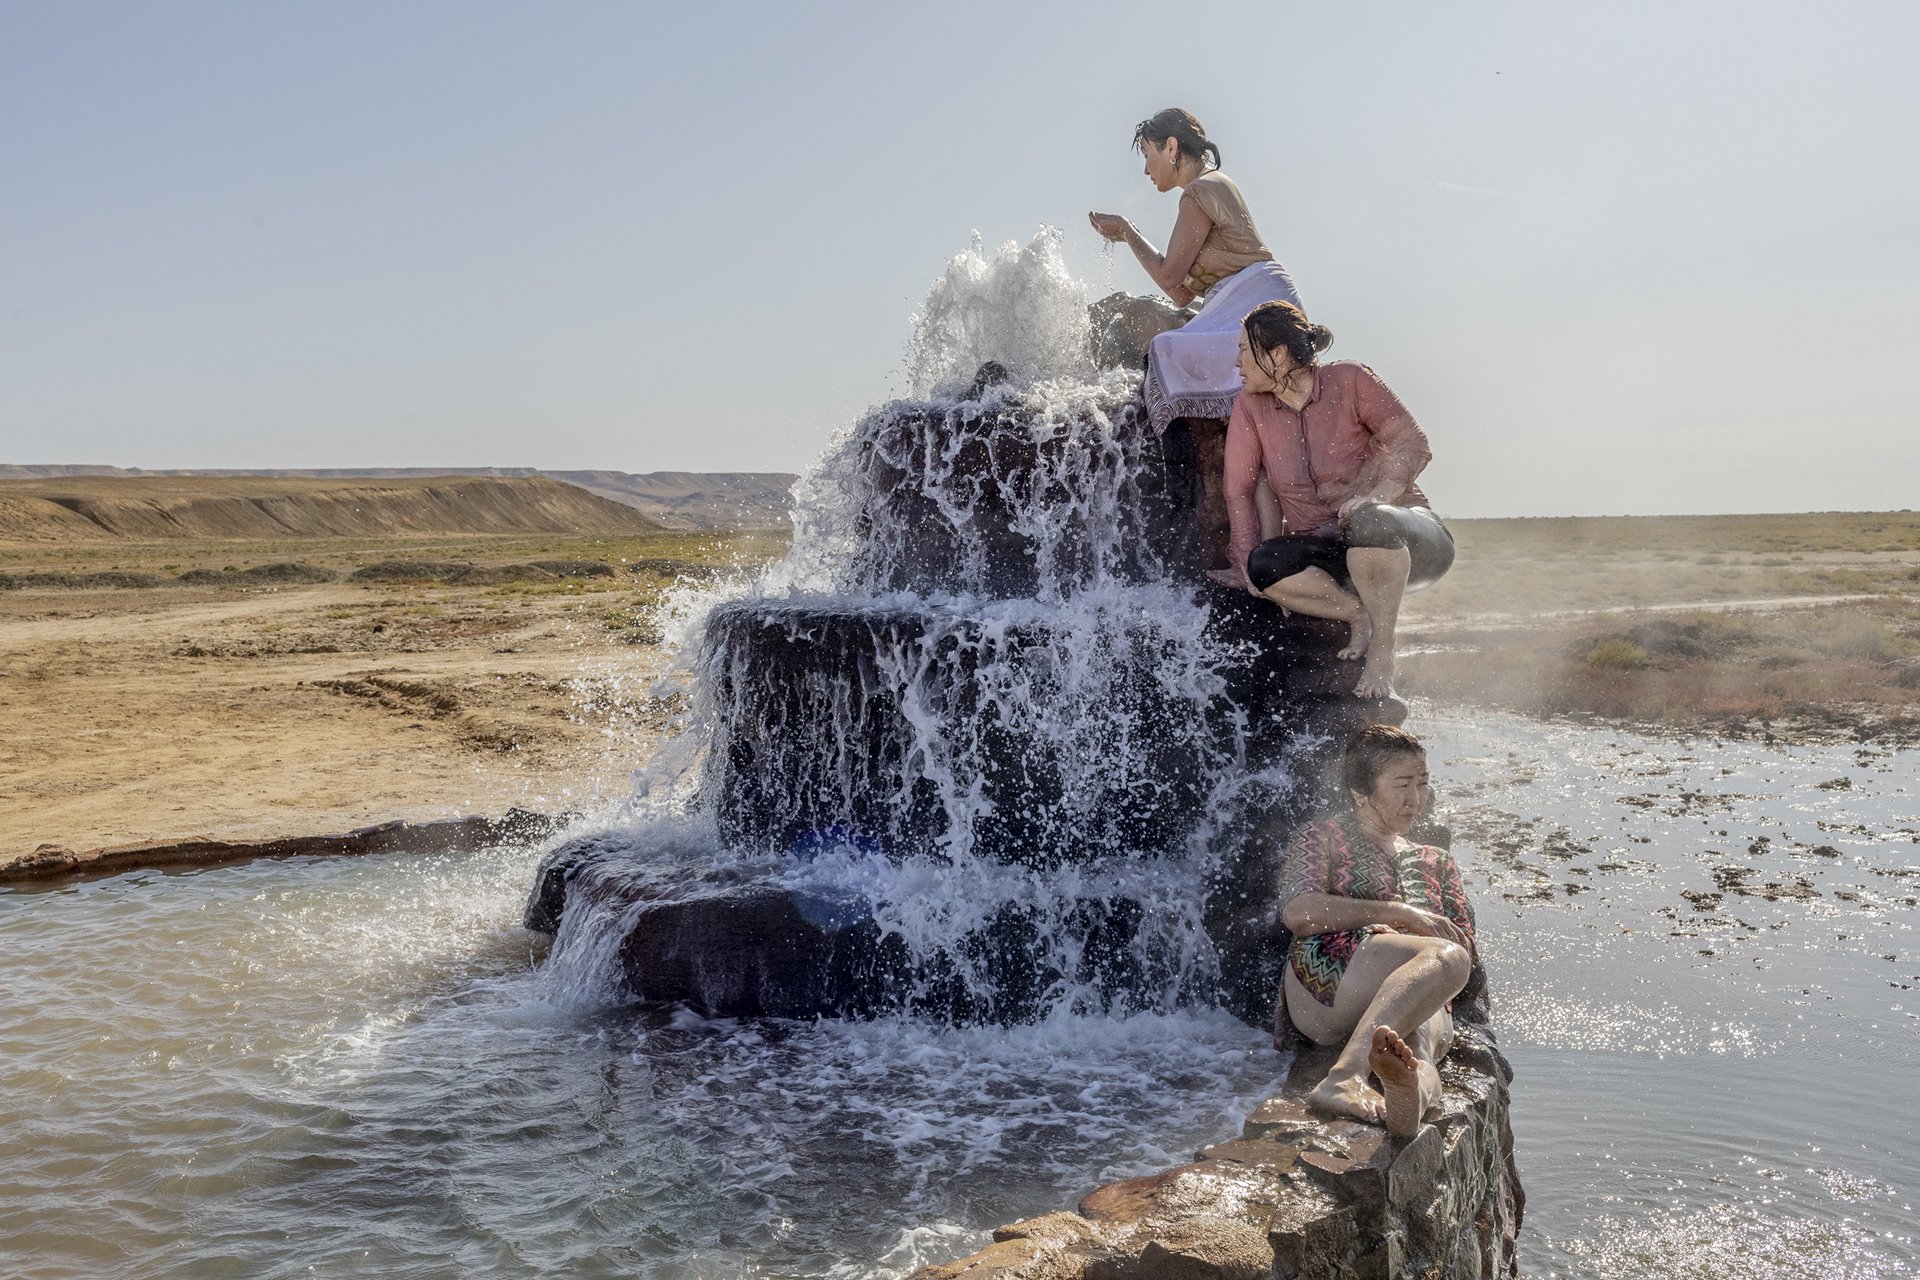 Women visit a hot spring that has emerged from the dried bed of the Aral Sea, near Akespe village, Kazakhstan. Once the world&rsquo;s fourth-largest lake, the Aral Sea has lost 90 percent of its content since river water was first diverted to serve agriculture and industry in the 1960s.